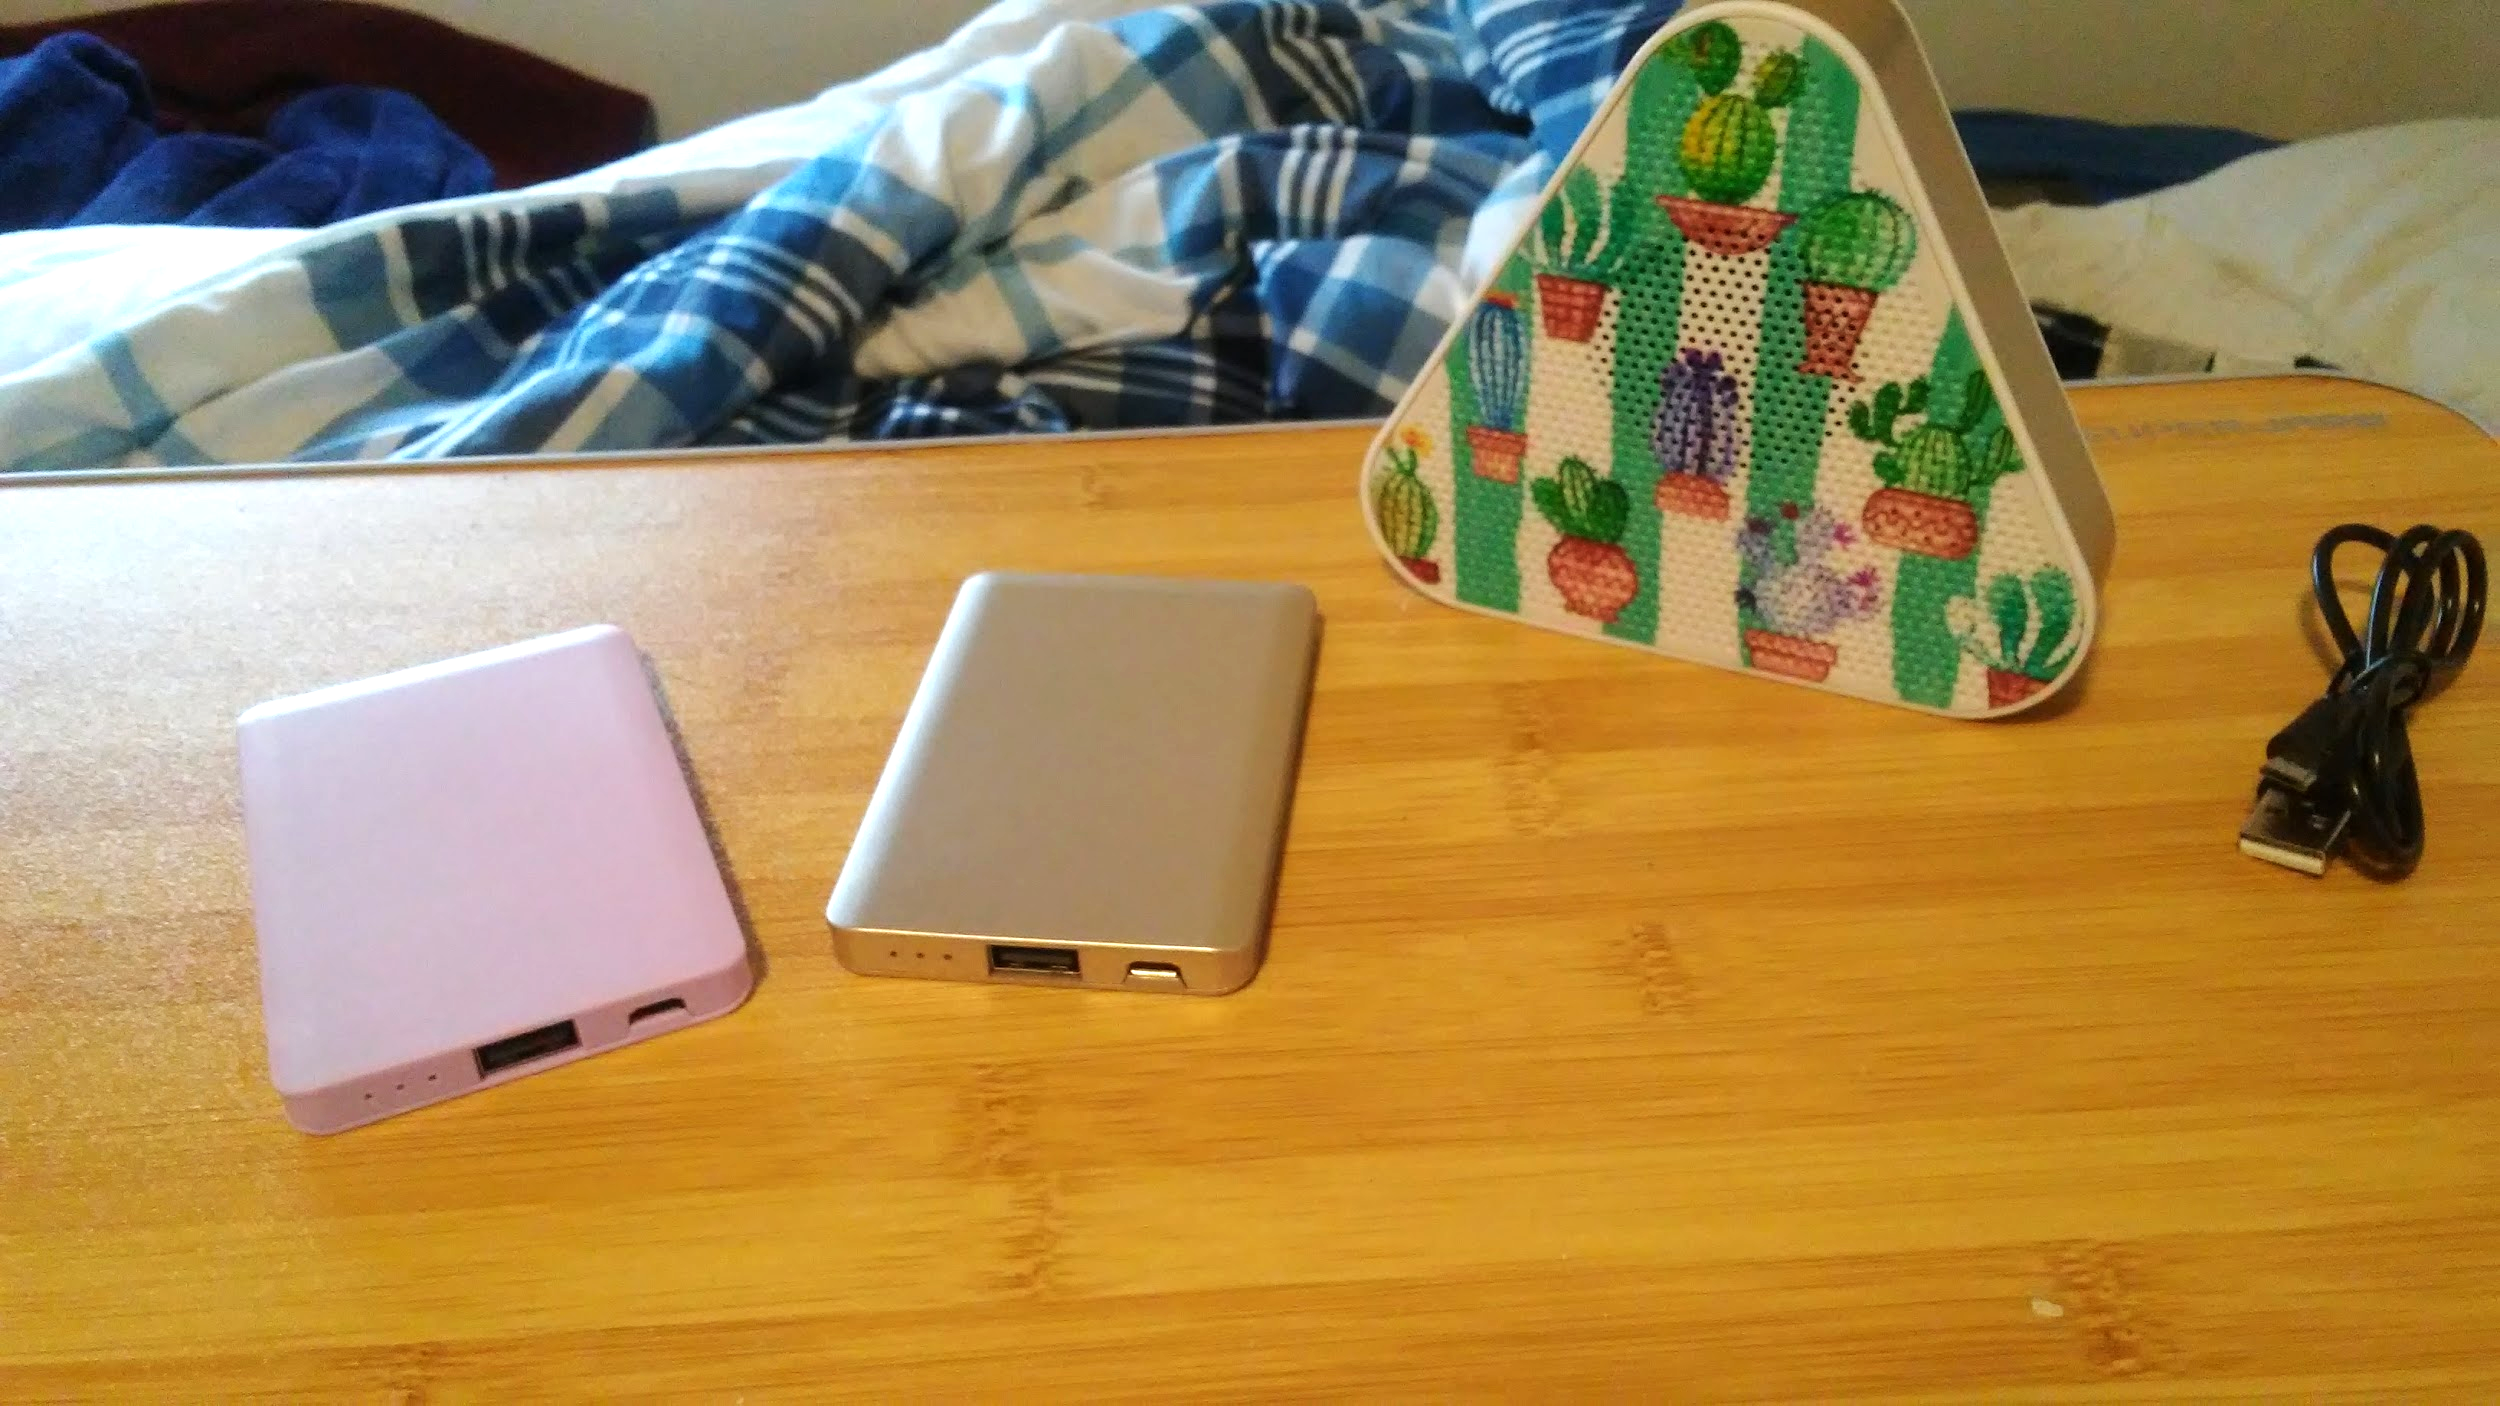 Images of a small portable bluetooth speaker with a cacti-pattern on it, and two power banks (pink and gold) 